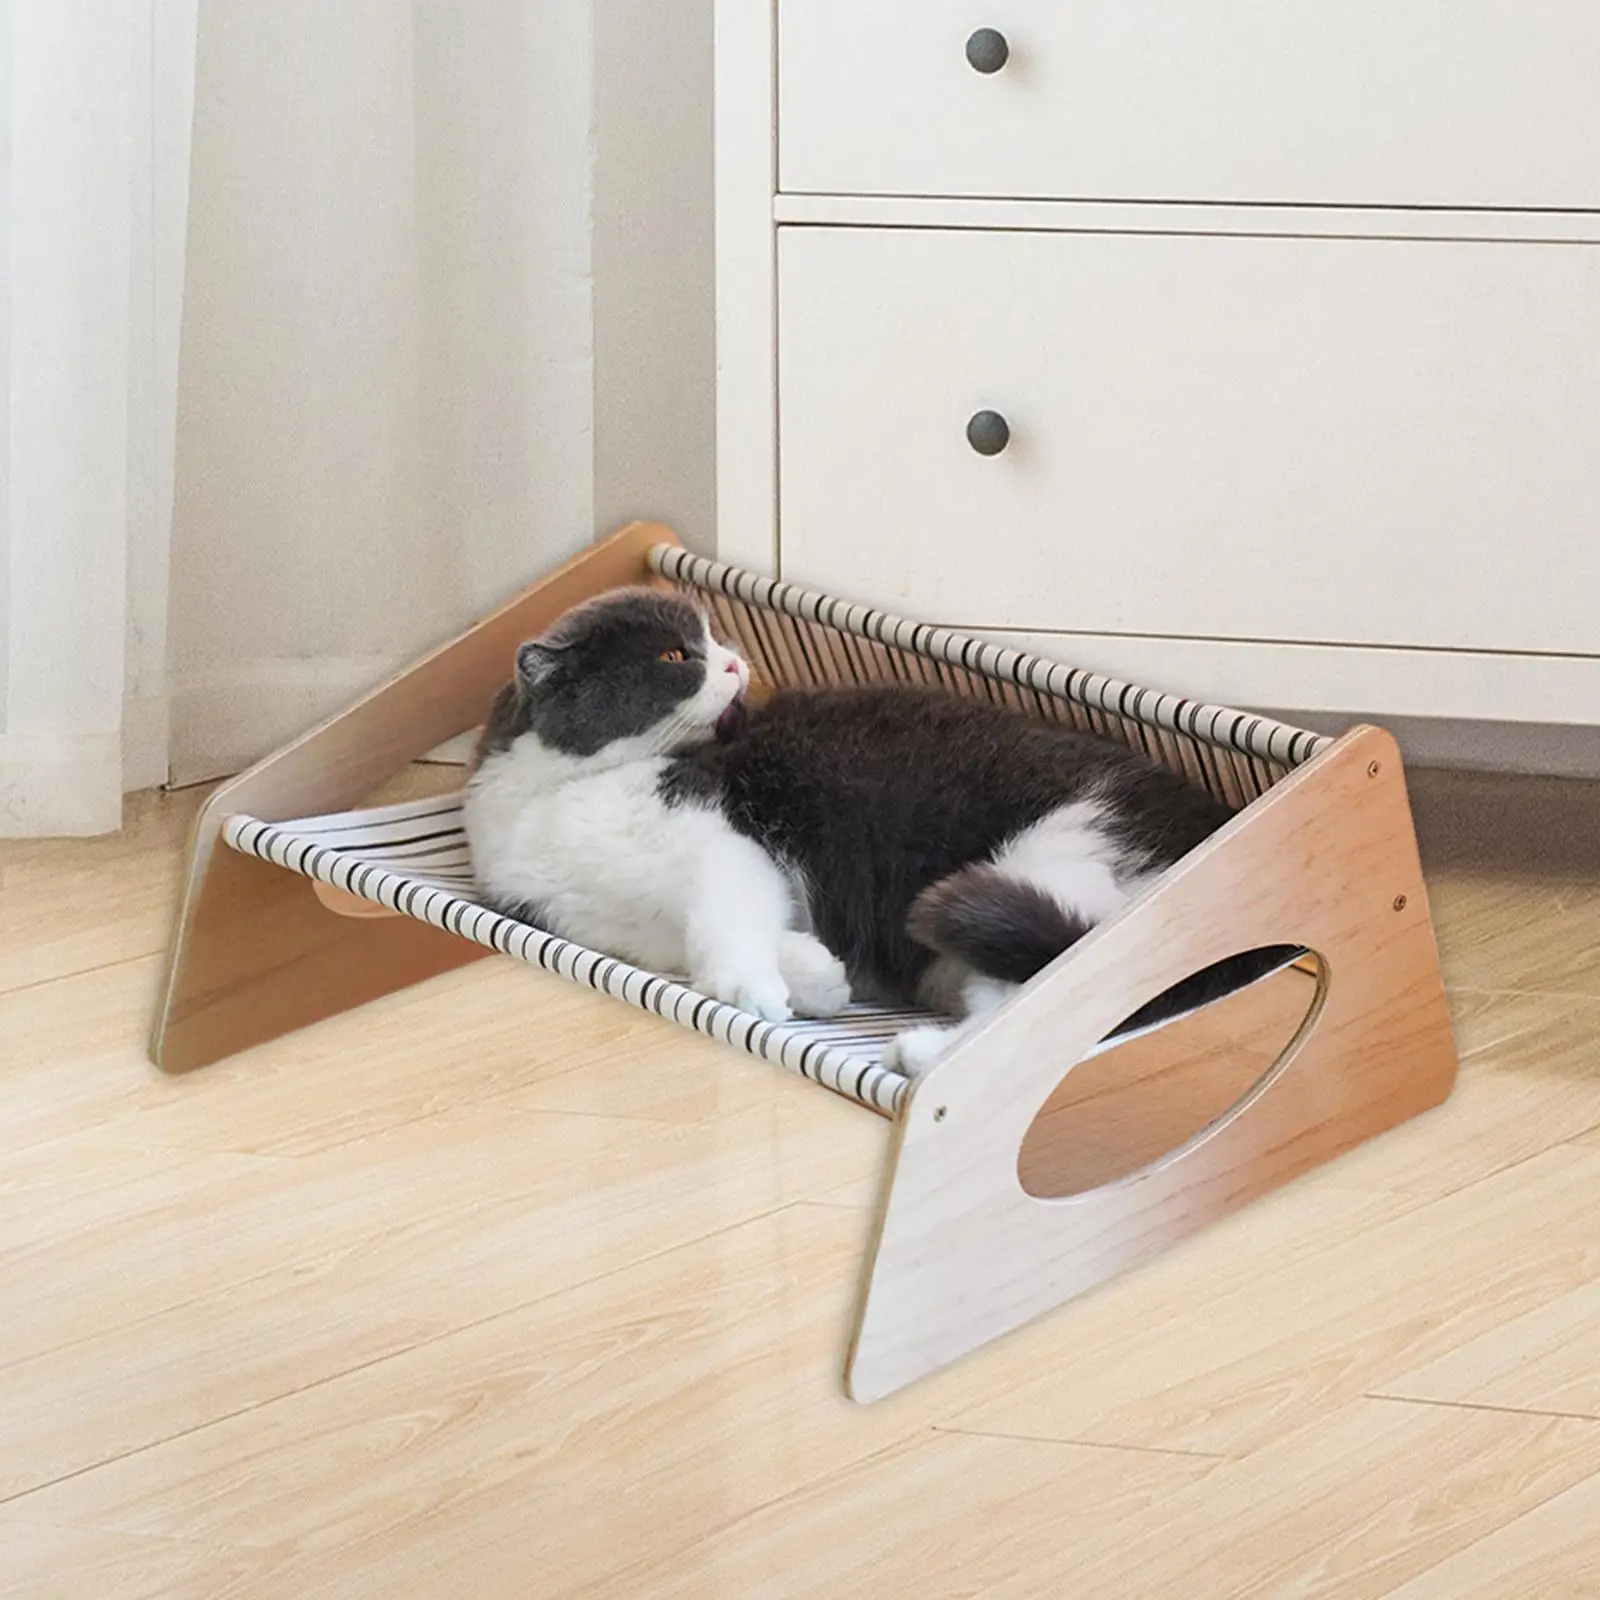 Cat Hammock Bed Breathable Cat Furniture Gift Elevated Cat Bed for Rabbit Bunny Kitten Small Animal Puppy Cats and Small Dogs